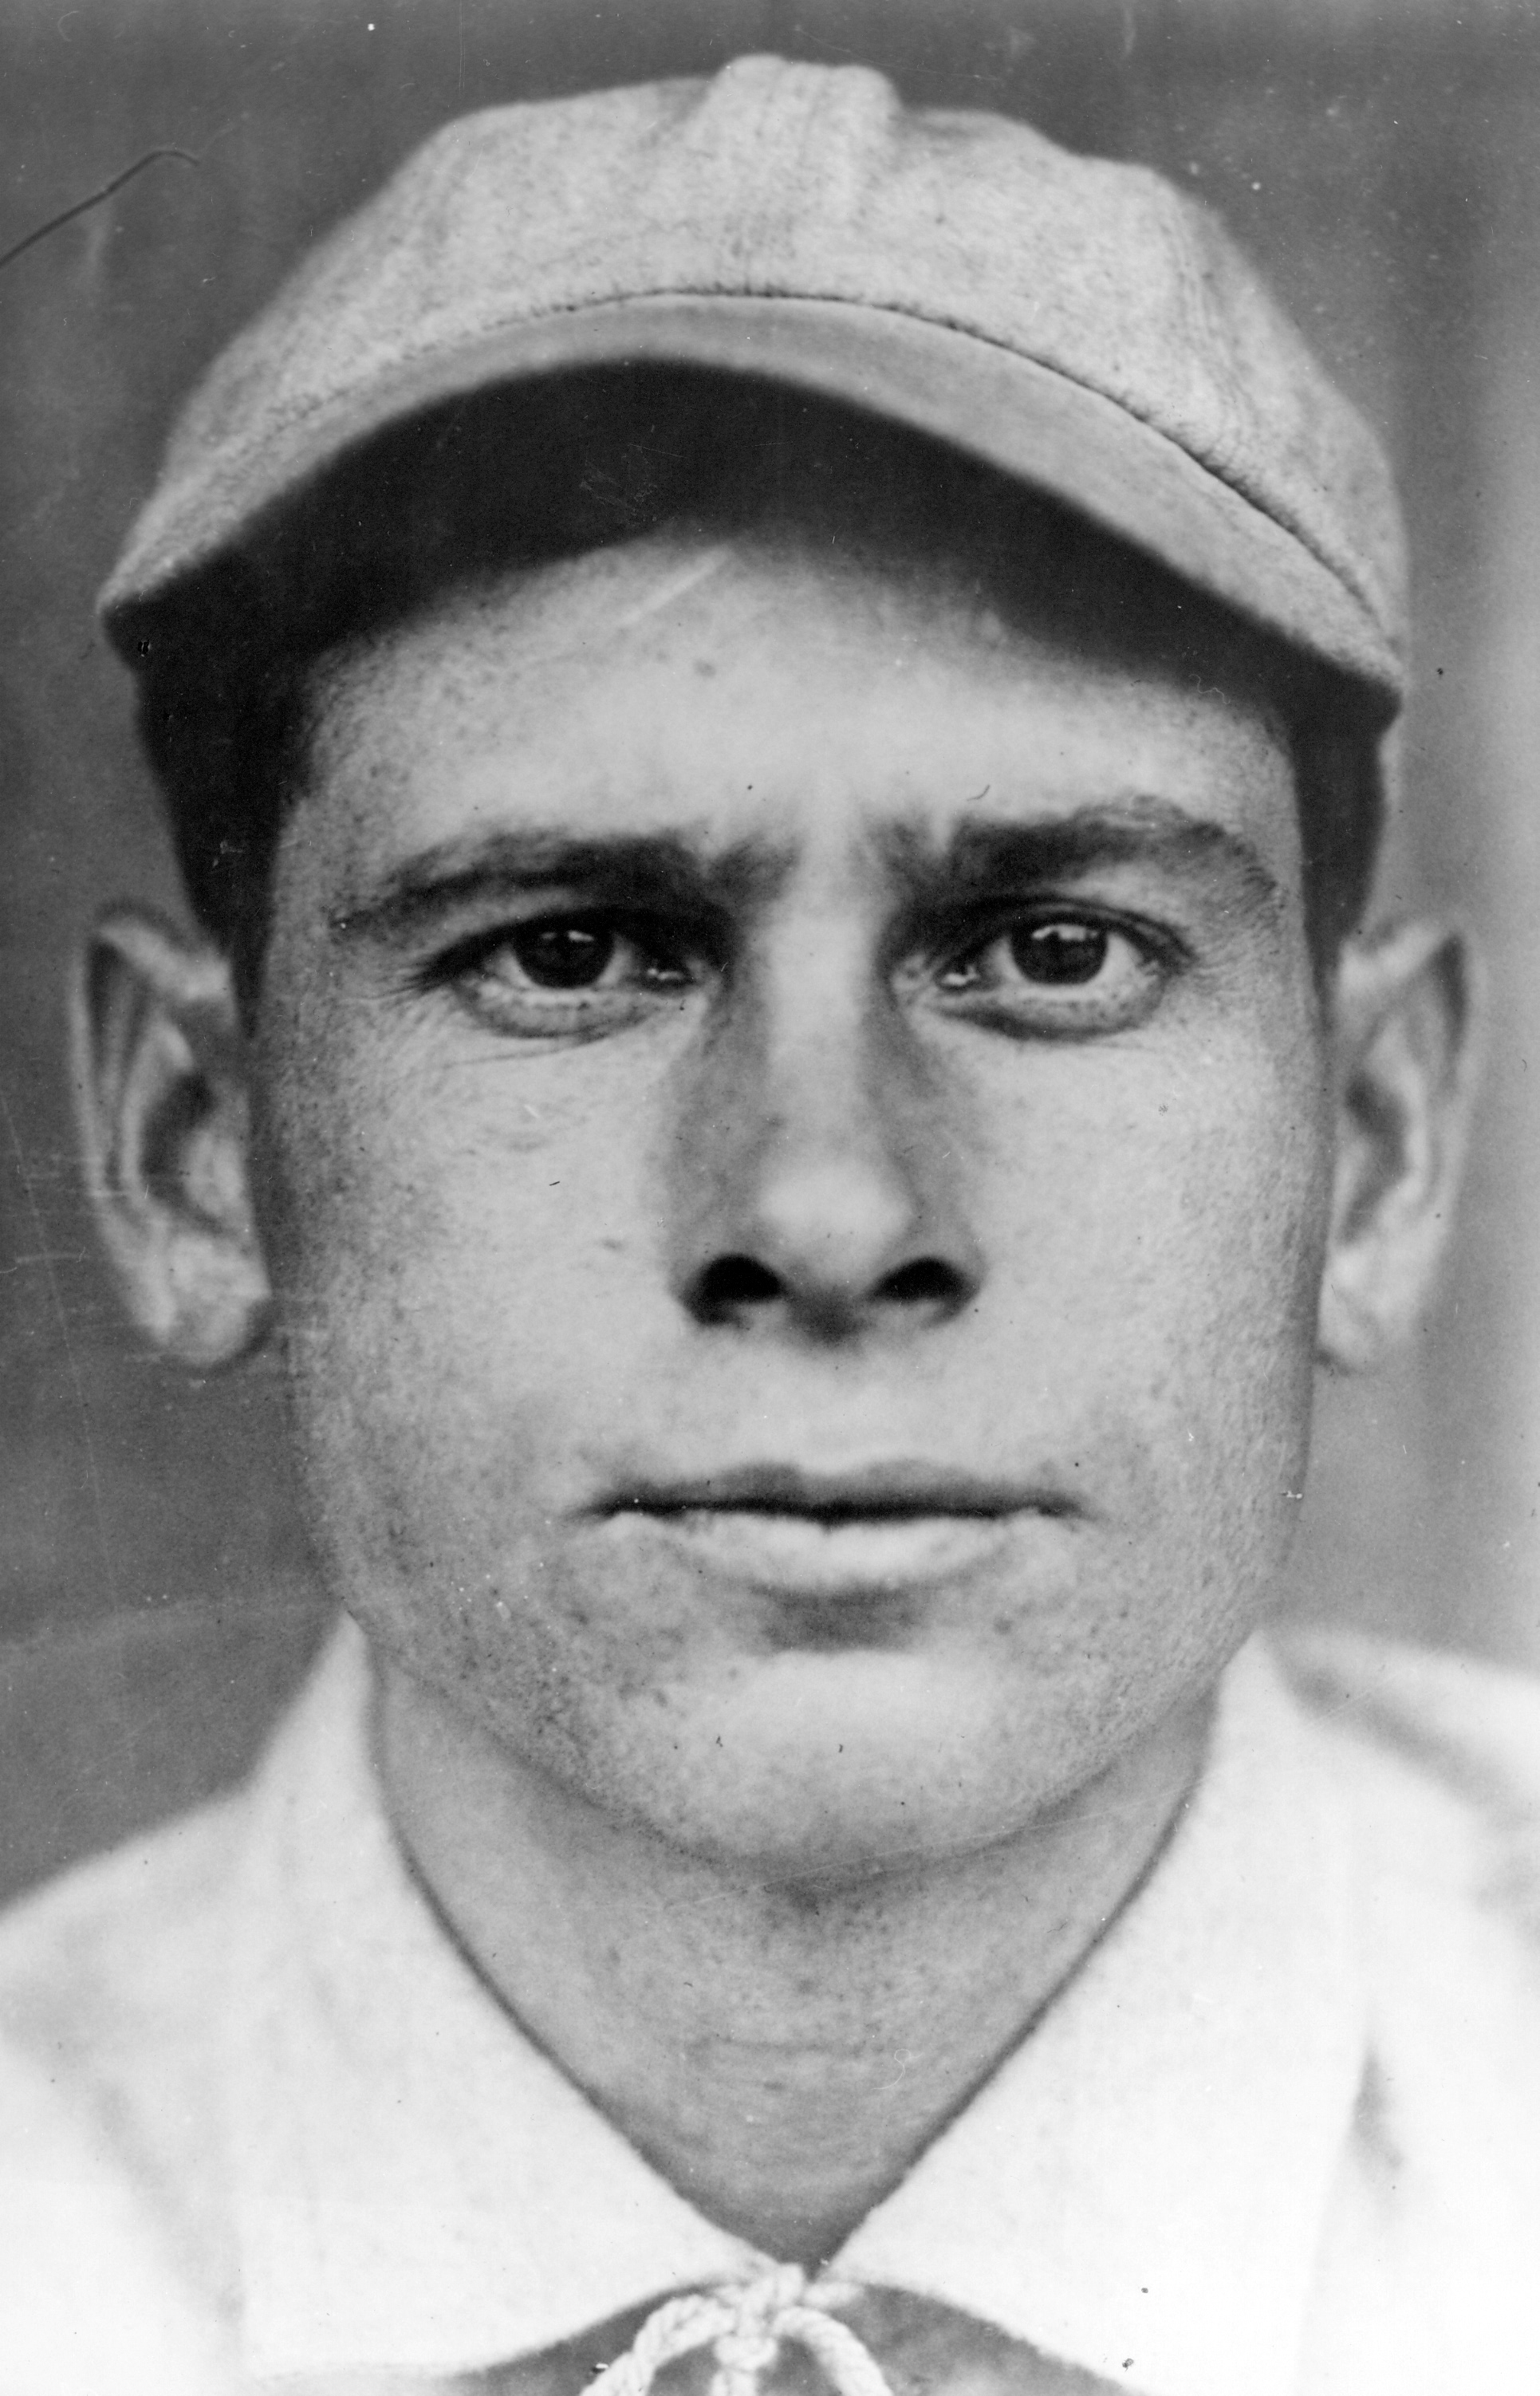 Spent five seasons as an infielder with various AL teams. His brother Mark never reached those heights; he batted just .135 for Decatur in 1909, but the little shortstop did collect the winning hit on May 30.